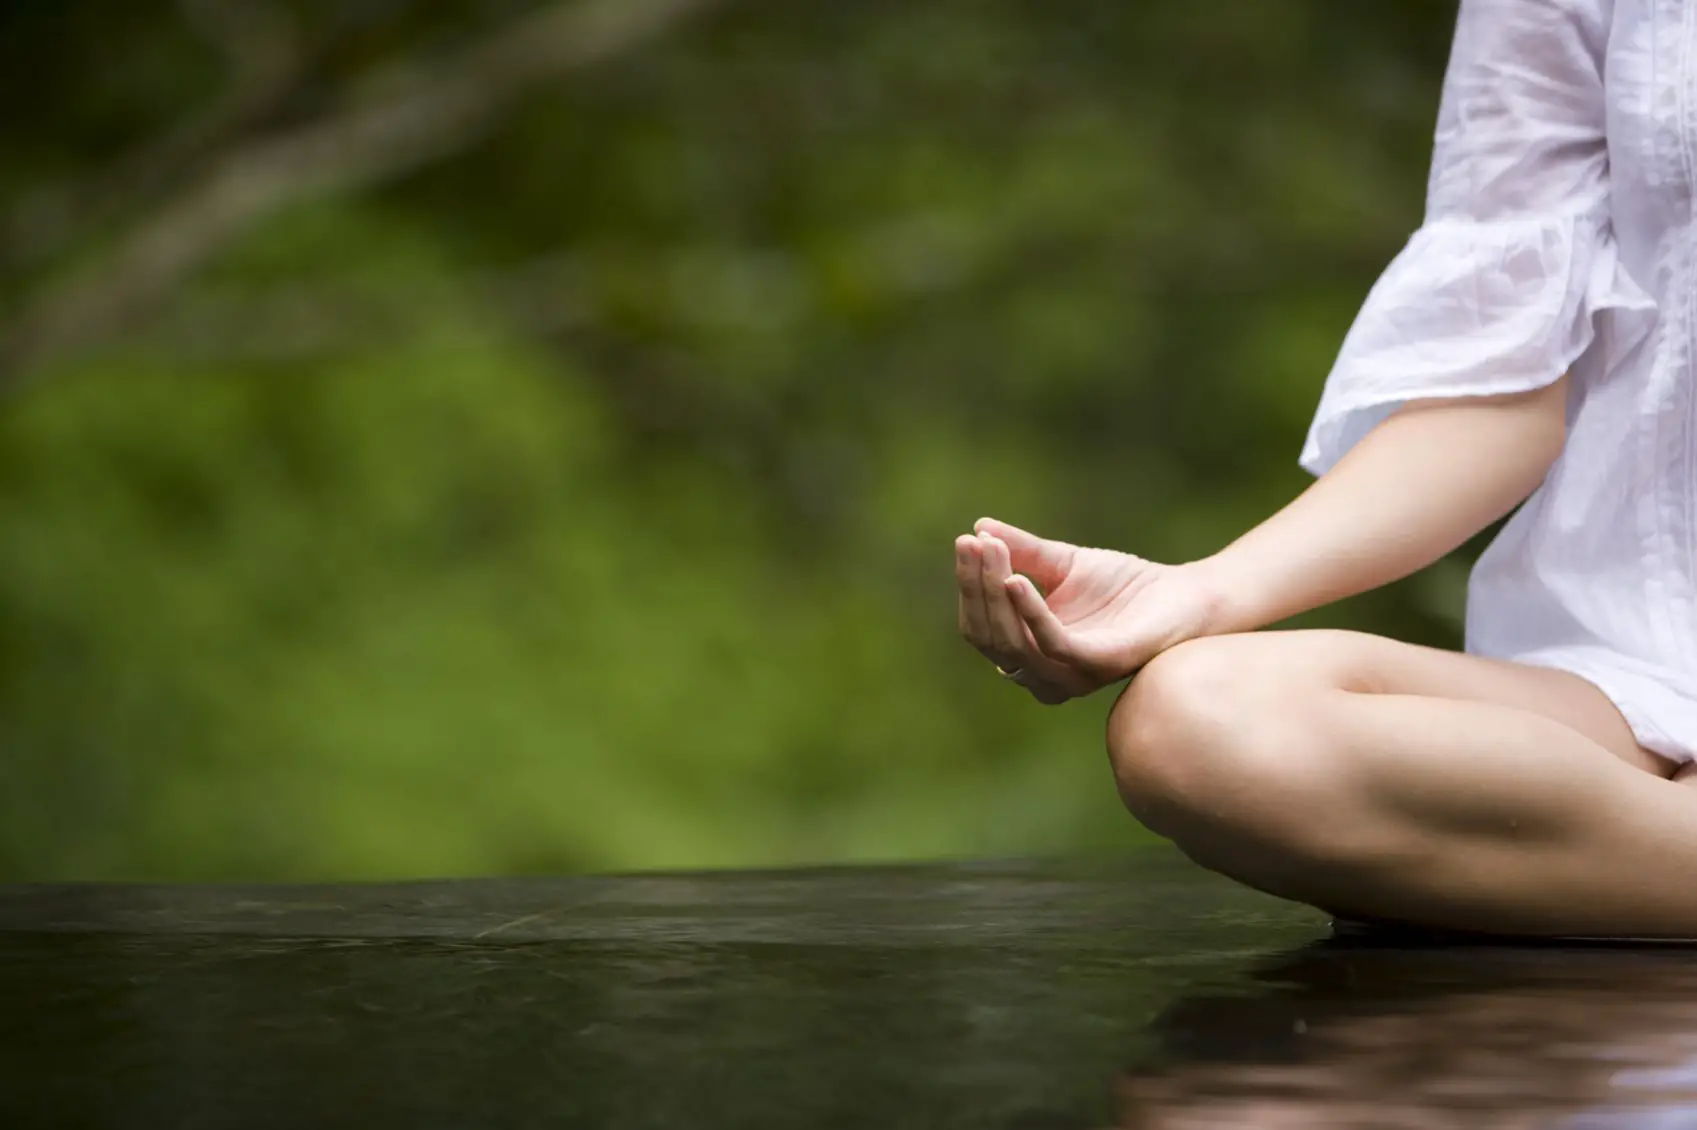 All the information about Meditation